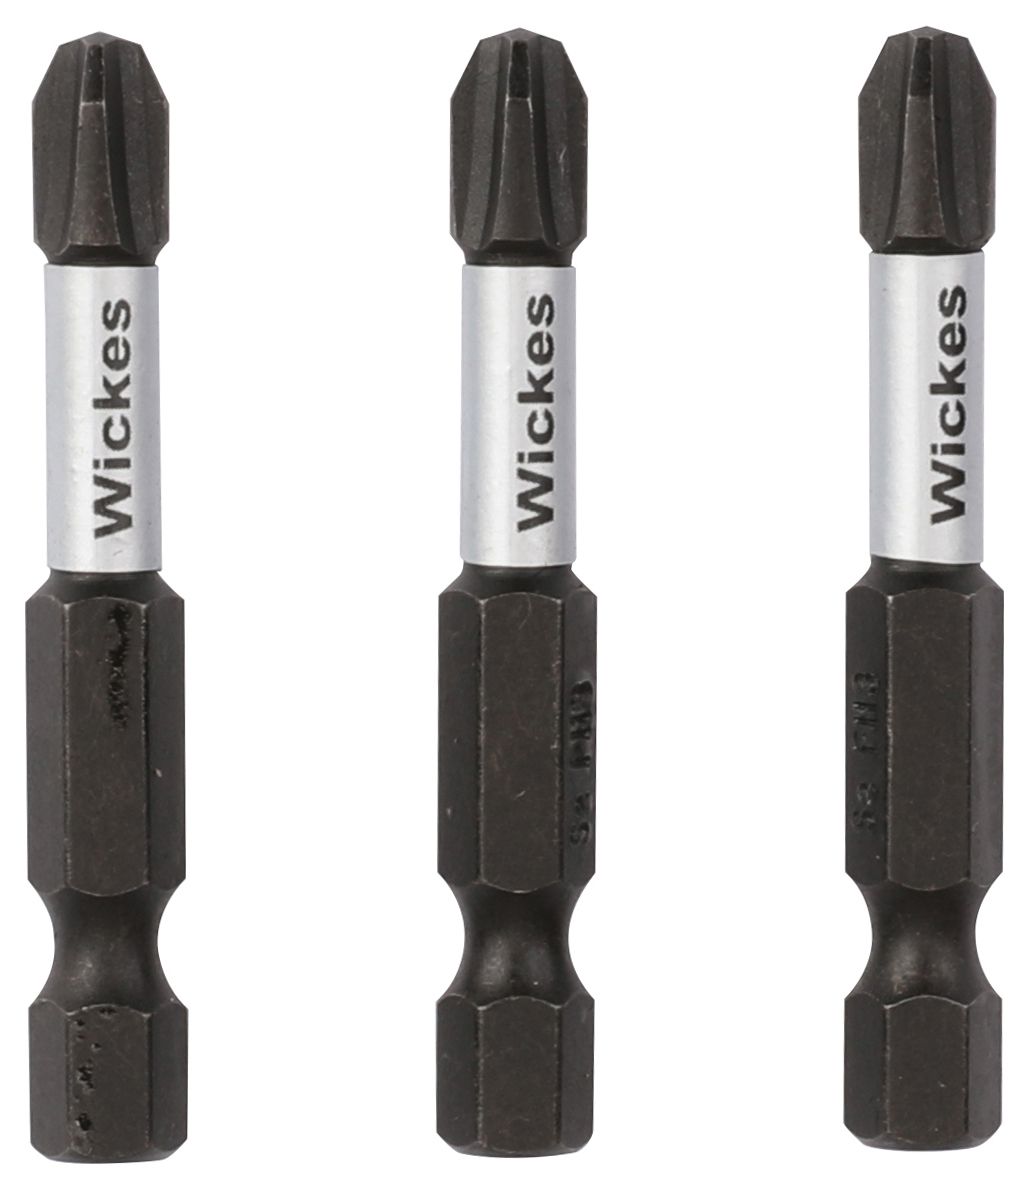 Image of Wickes Impact Screwdriver Bit PZ3 - 25mm - Pack of 3